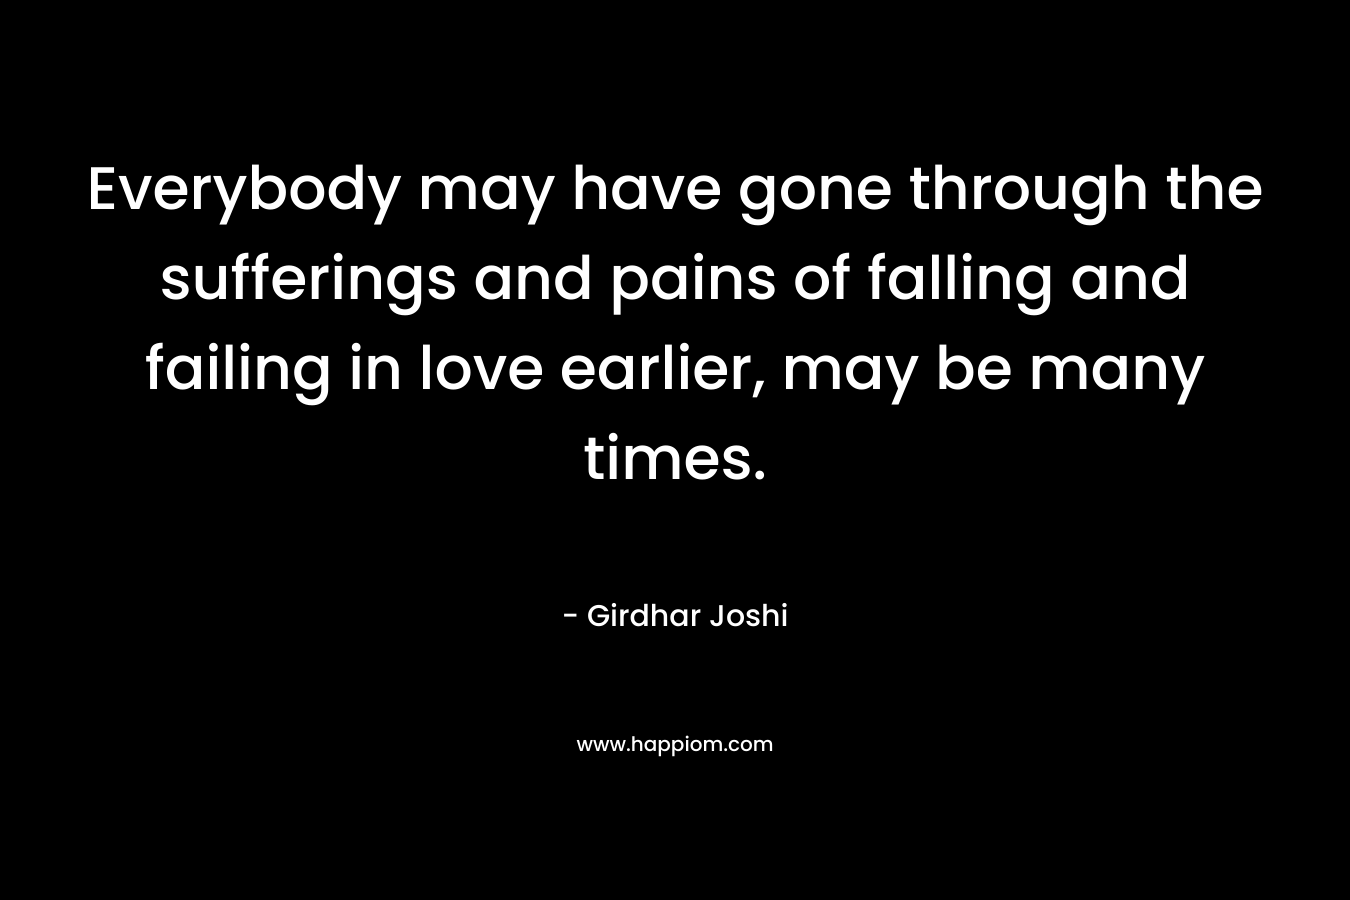 Everybody may have gone through the sufferings and pains of falling and failing in love earlier, may be many times.